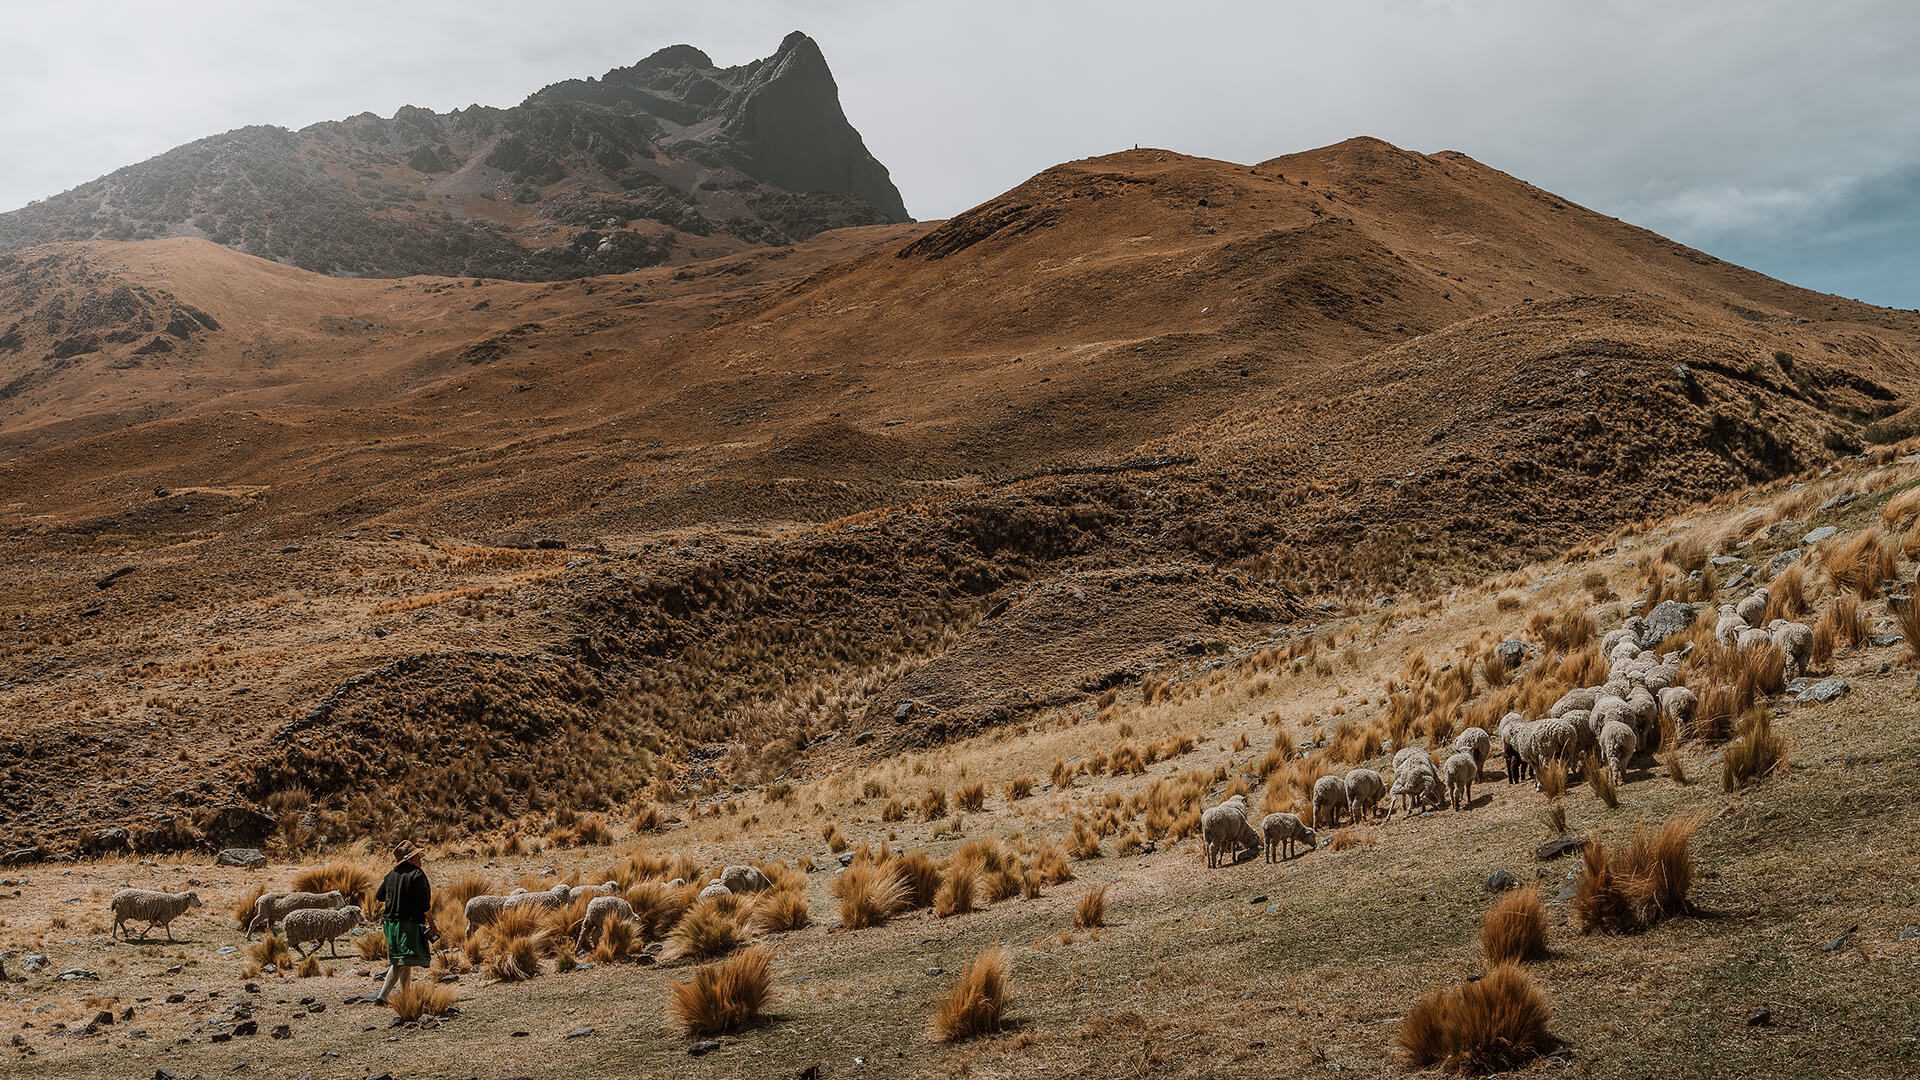 Quechua woman with her sheep in Andean grassland landscape | Llama Trek Olleros to Chavin with RESPONSible Travel Peru | Photo by Bjorn Snelders